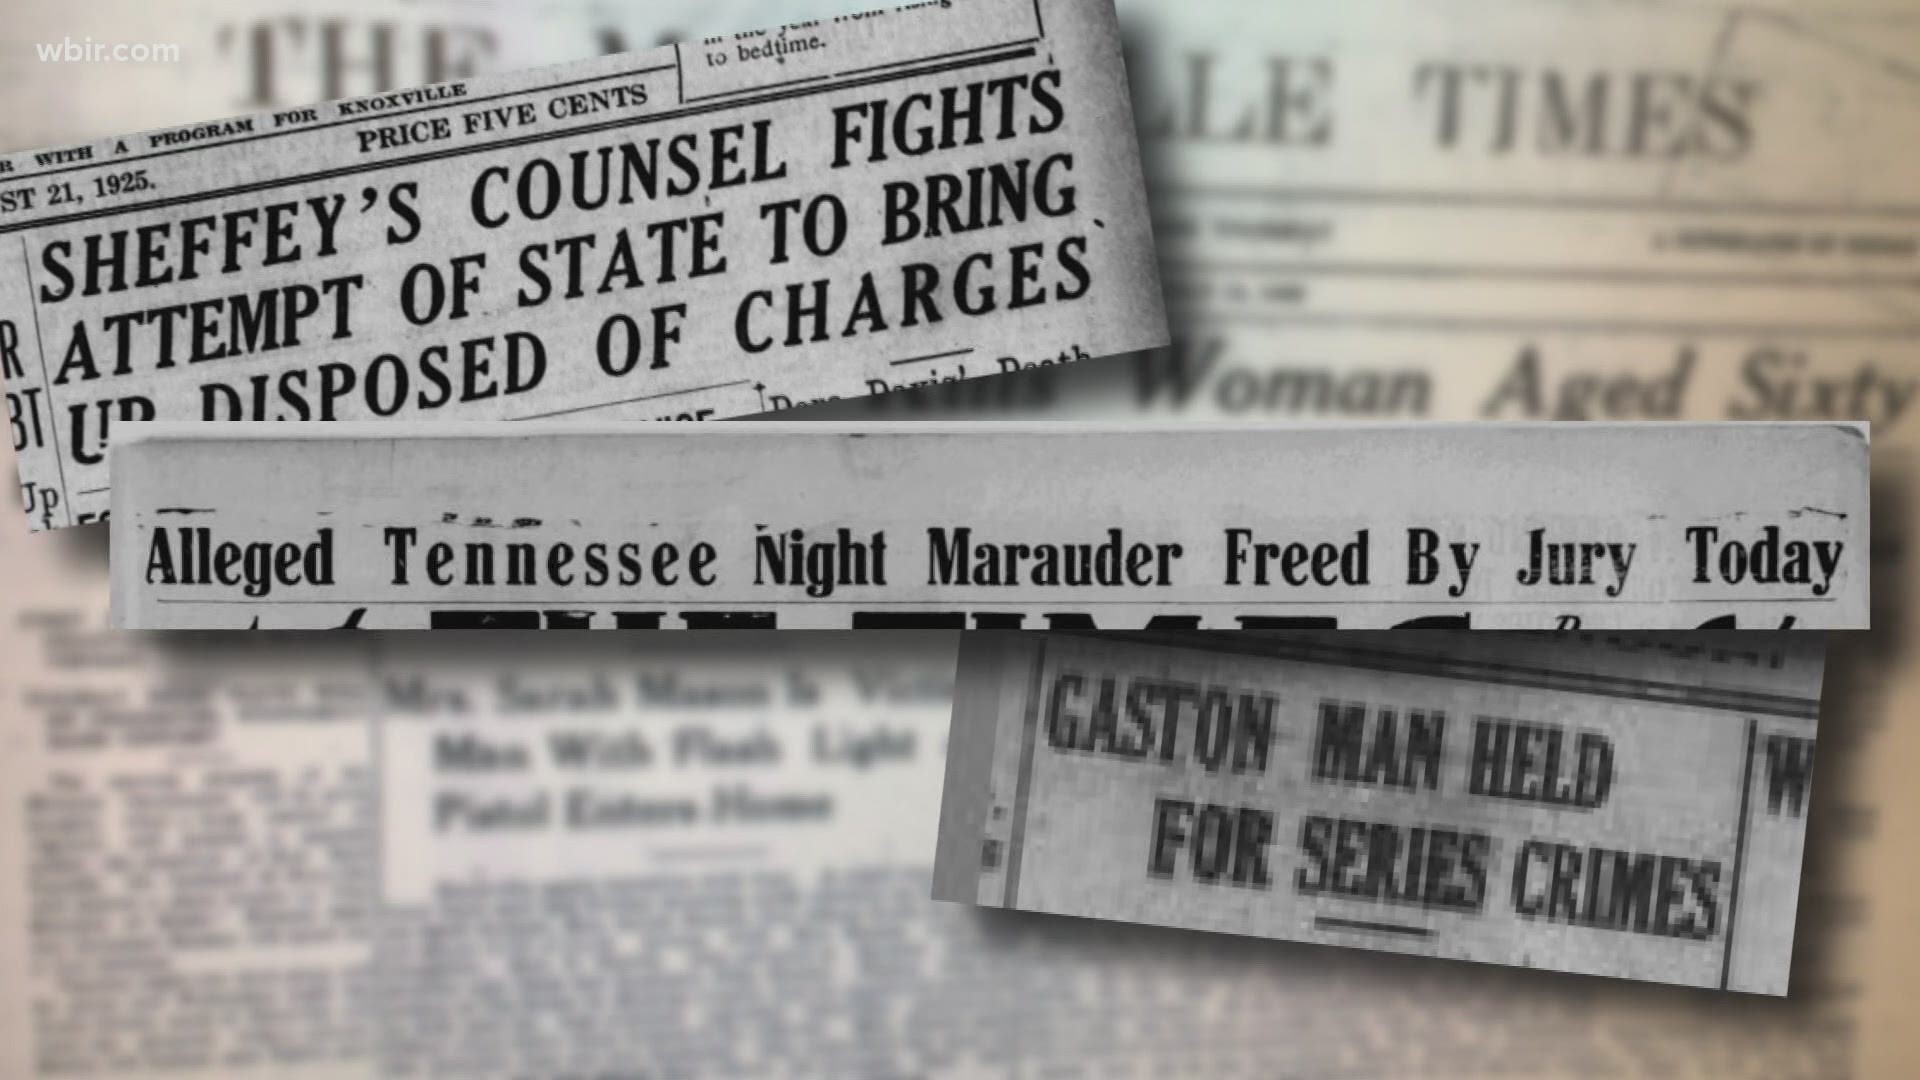 The class focuses on the murders connected to the "Night Marauder," a series of crimes around a century ago in the Knoxville, Maryville and Alcoa areas.